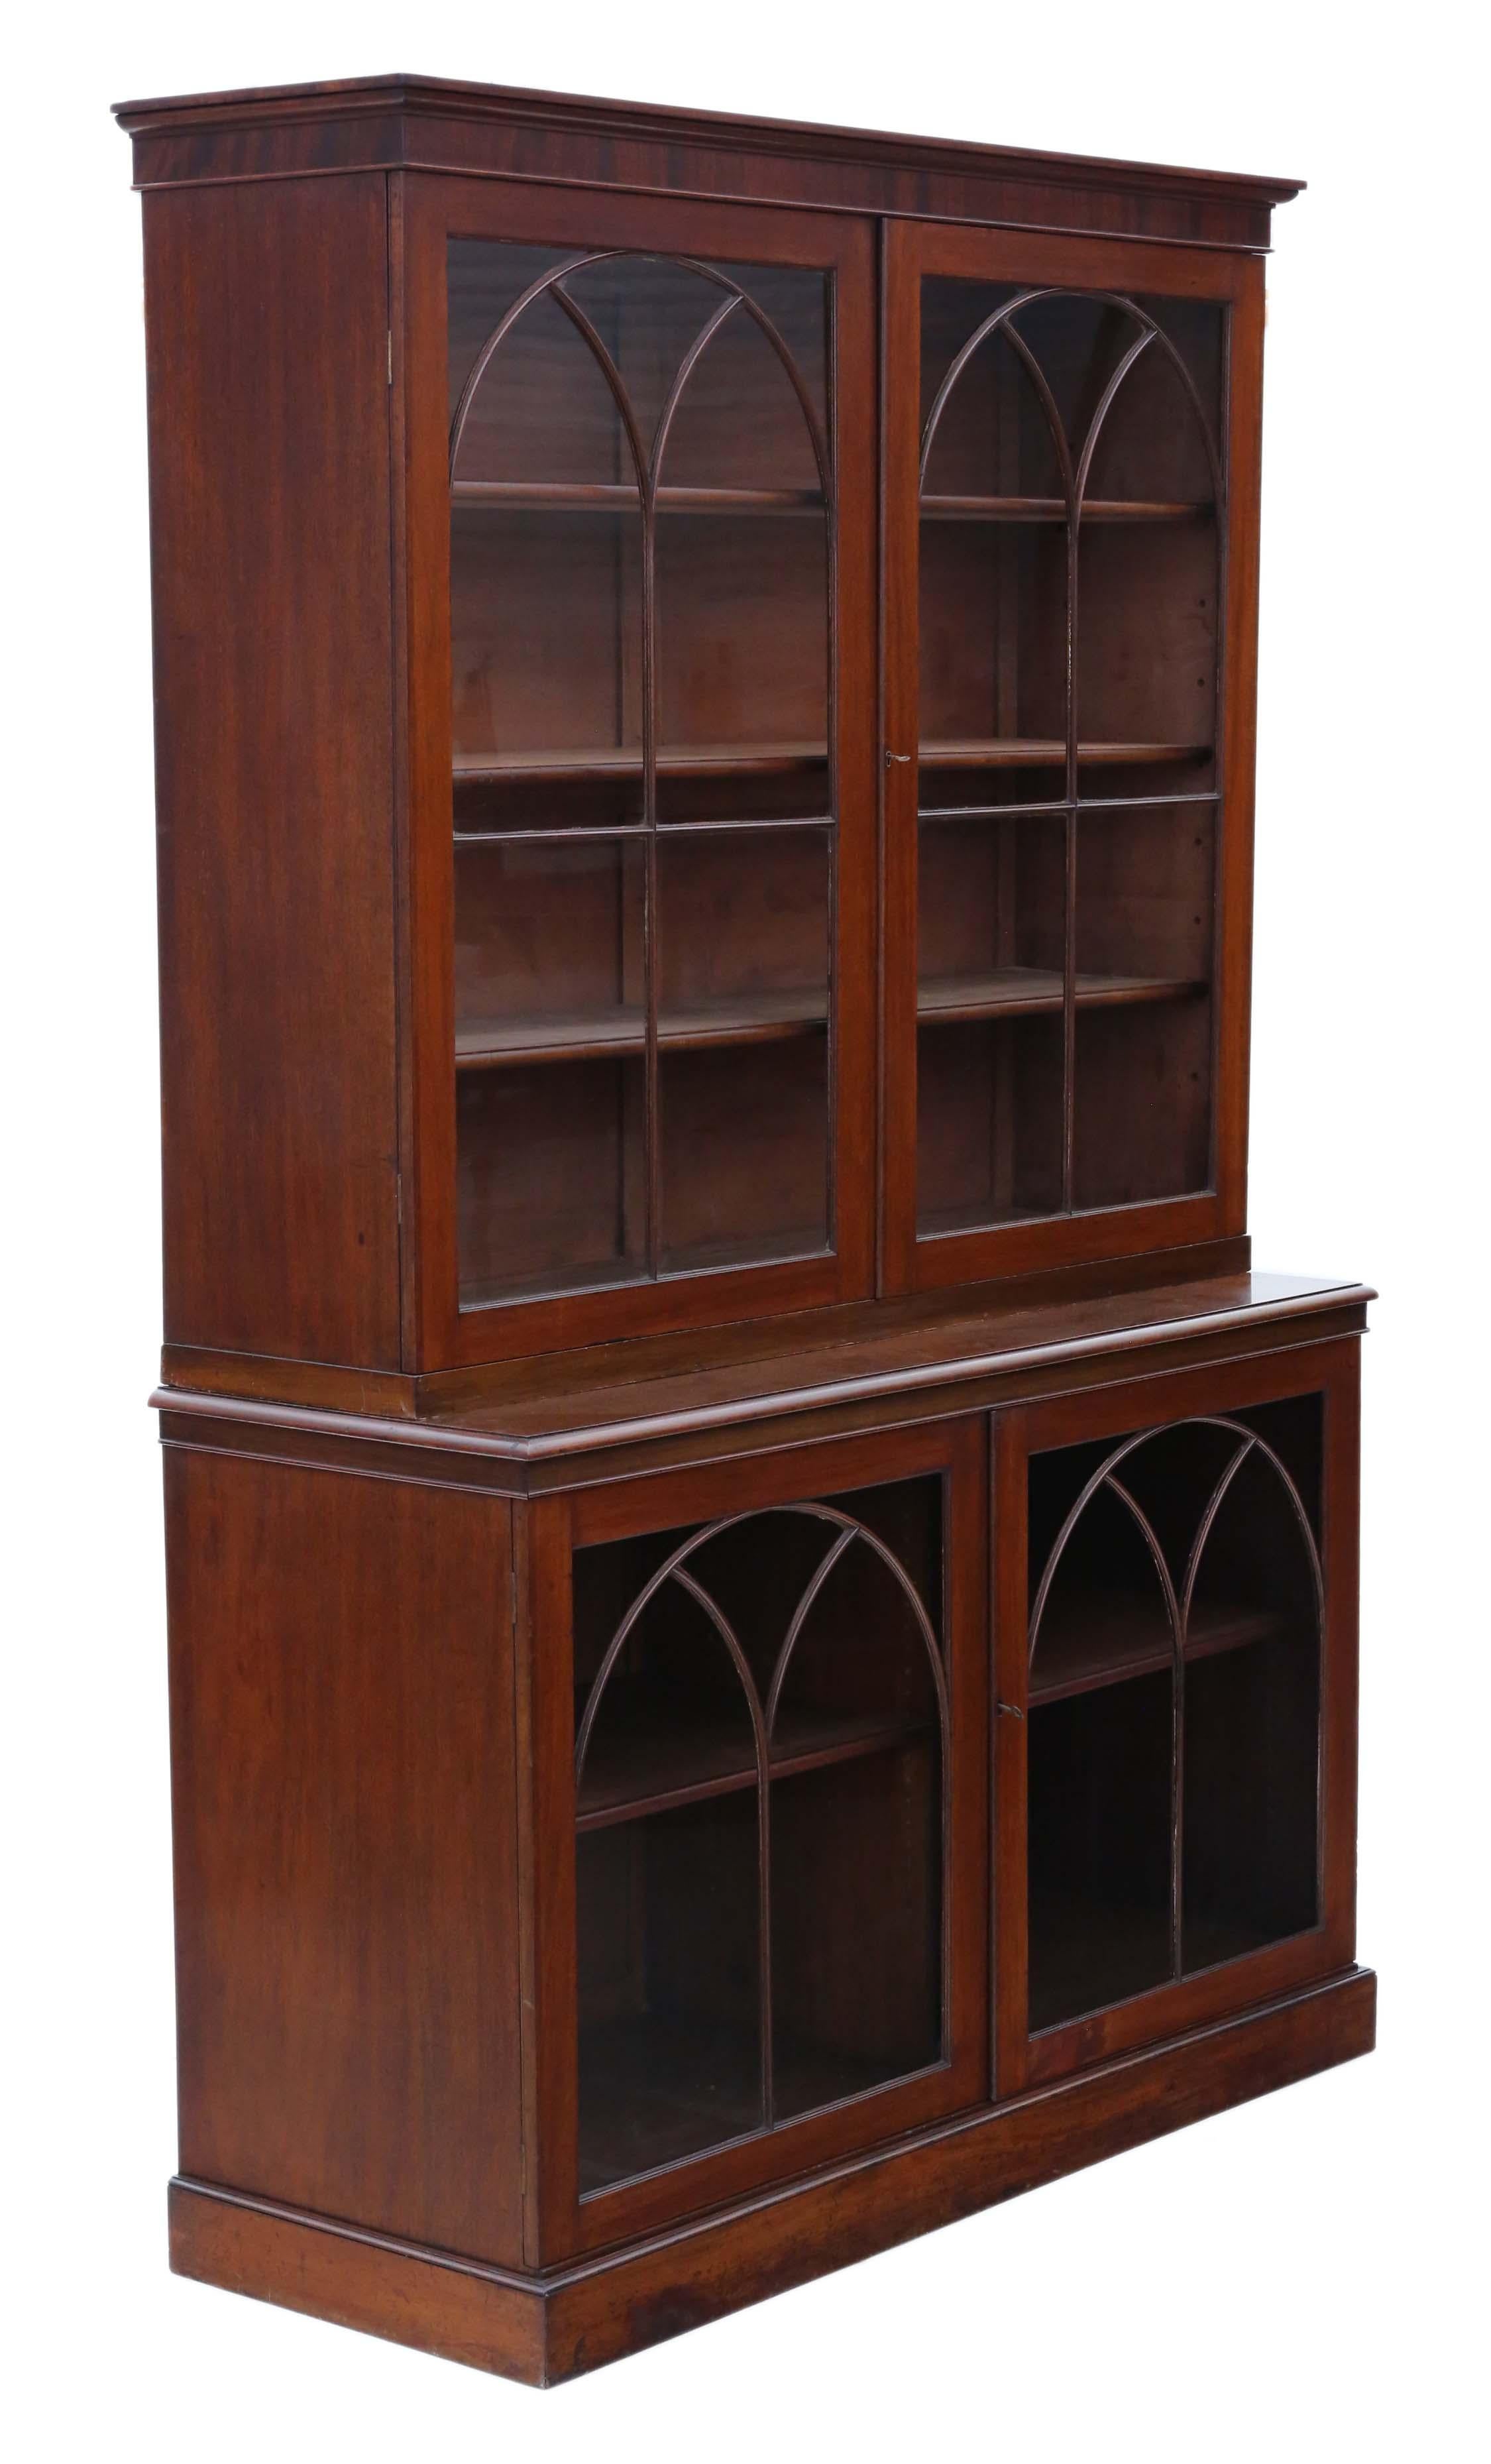 Antique very large fine quality 19th Century mahogany glazed bookcase or display cabinet C1850 ~ 5' wide.

Beautiful arched glazing bars, with a simple clean design.

This is a lovely quality bookcase, that is full of age, charm and